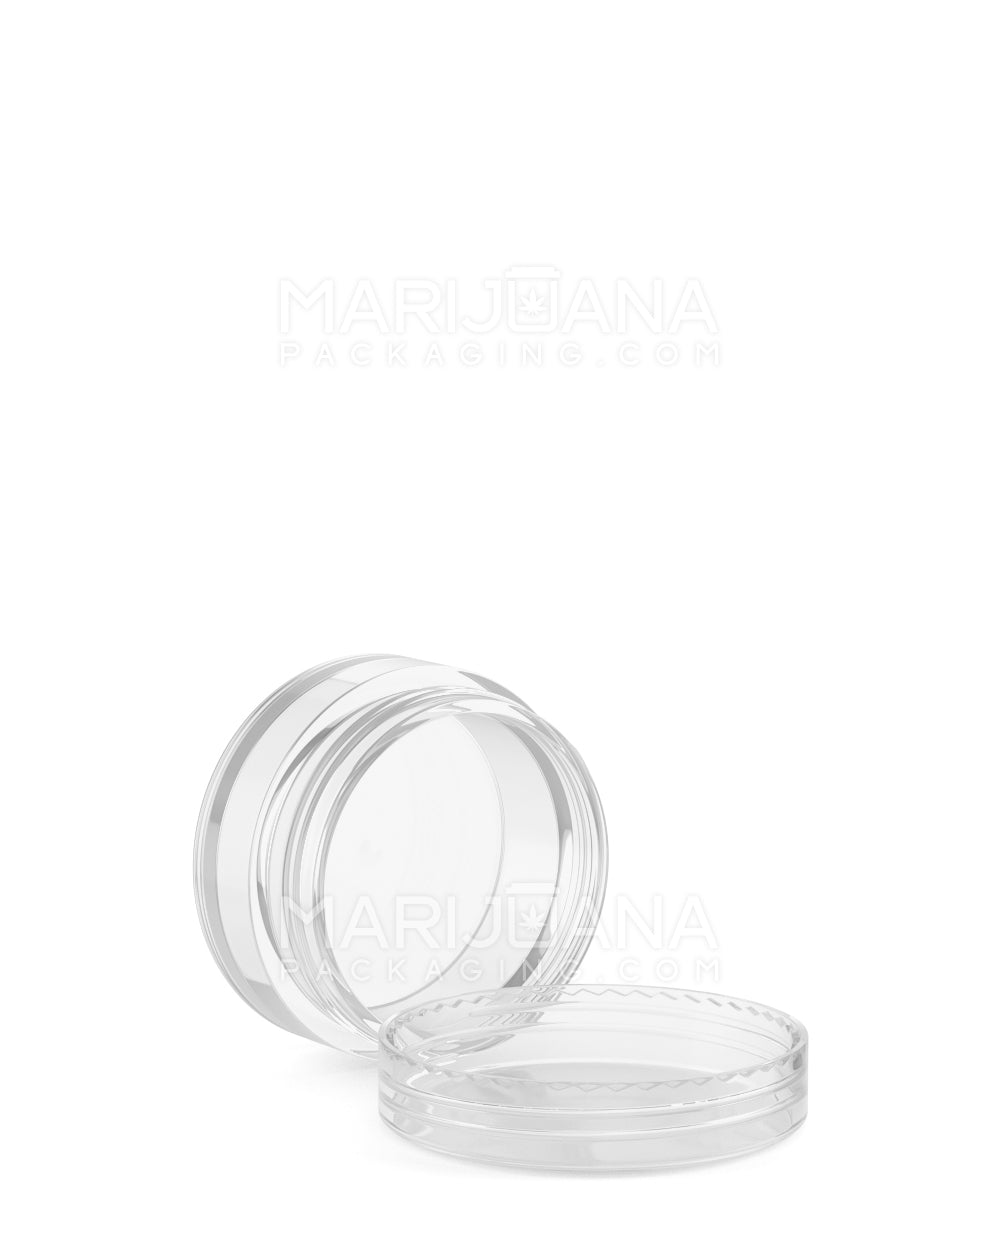 Clear Concentrate Containers w/ Screw Top Cap | 7mL - Acrylic - 200 Count - 3